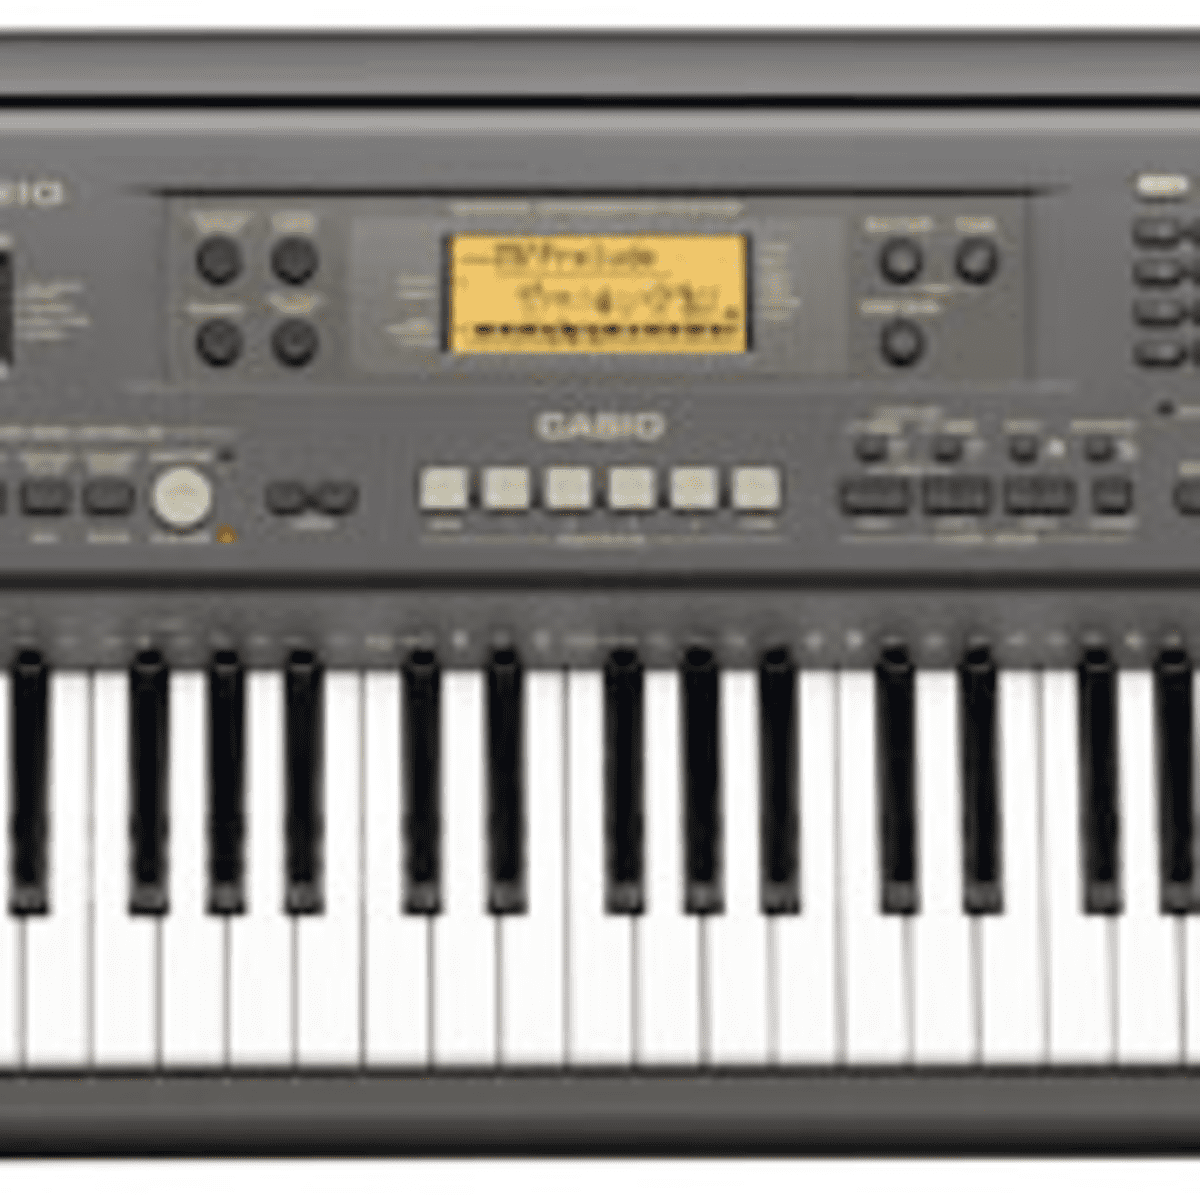 Finding Casio WK-110 Drivers: Getting Your Casio WK-110 MIDI Keyboard To Work With Mac OS X - HubPages